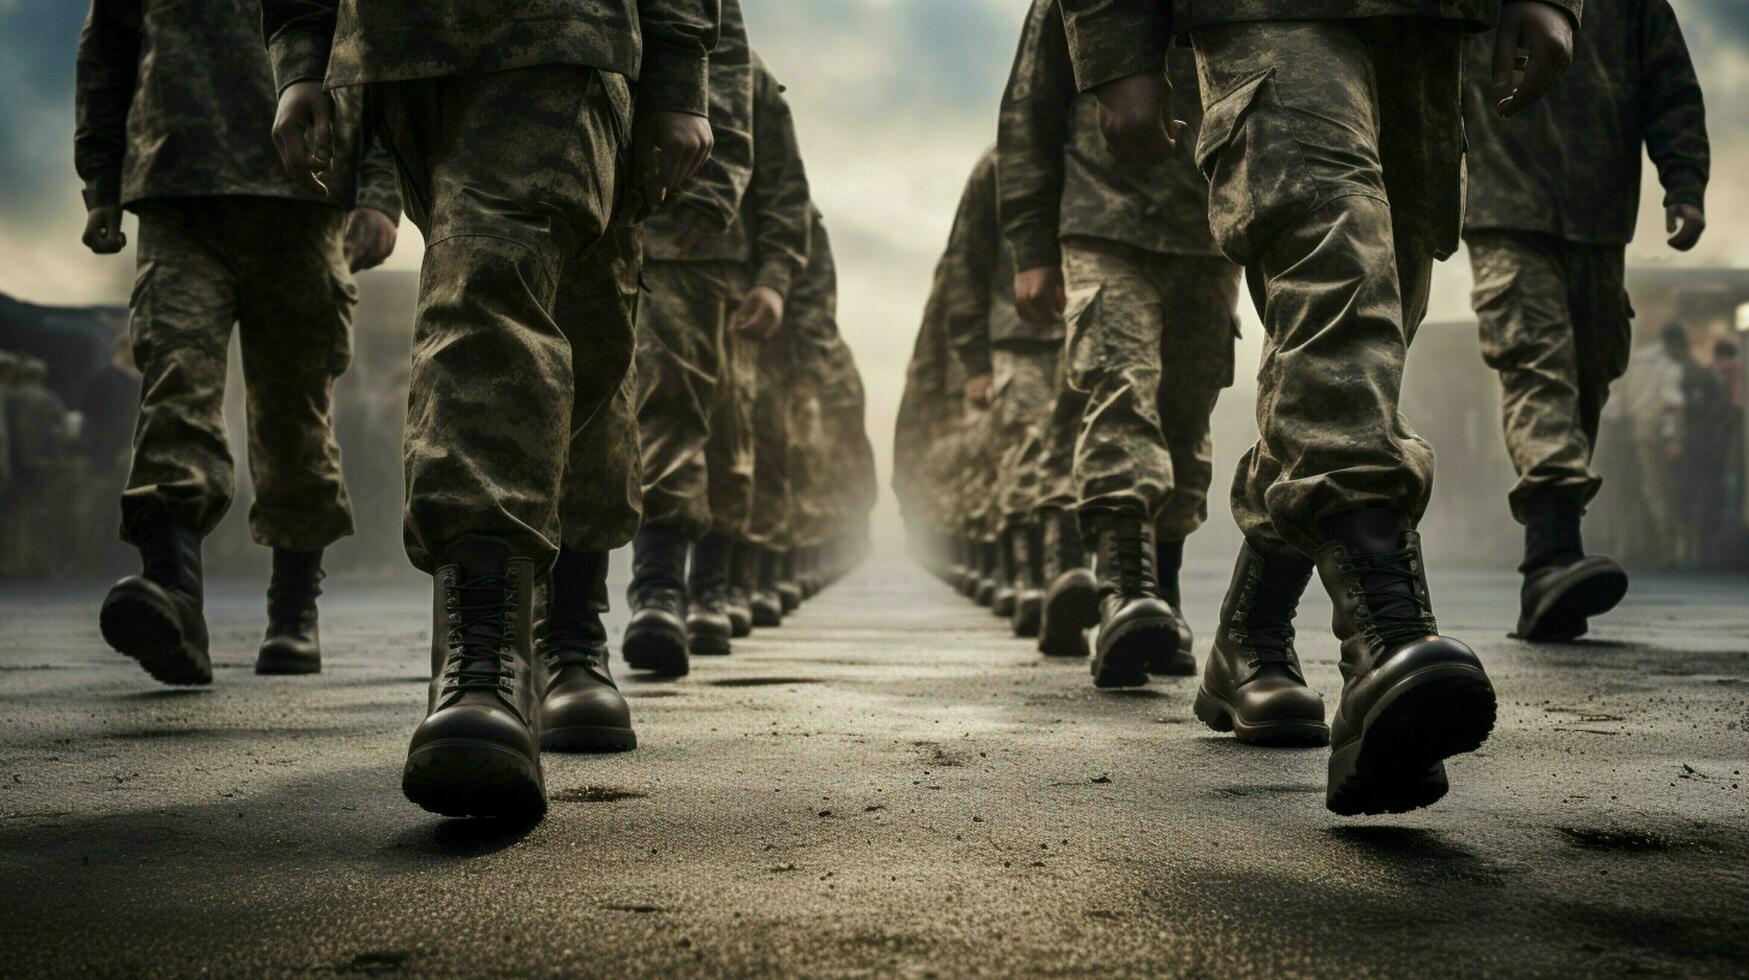 marching army of men in uniform and boots photo